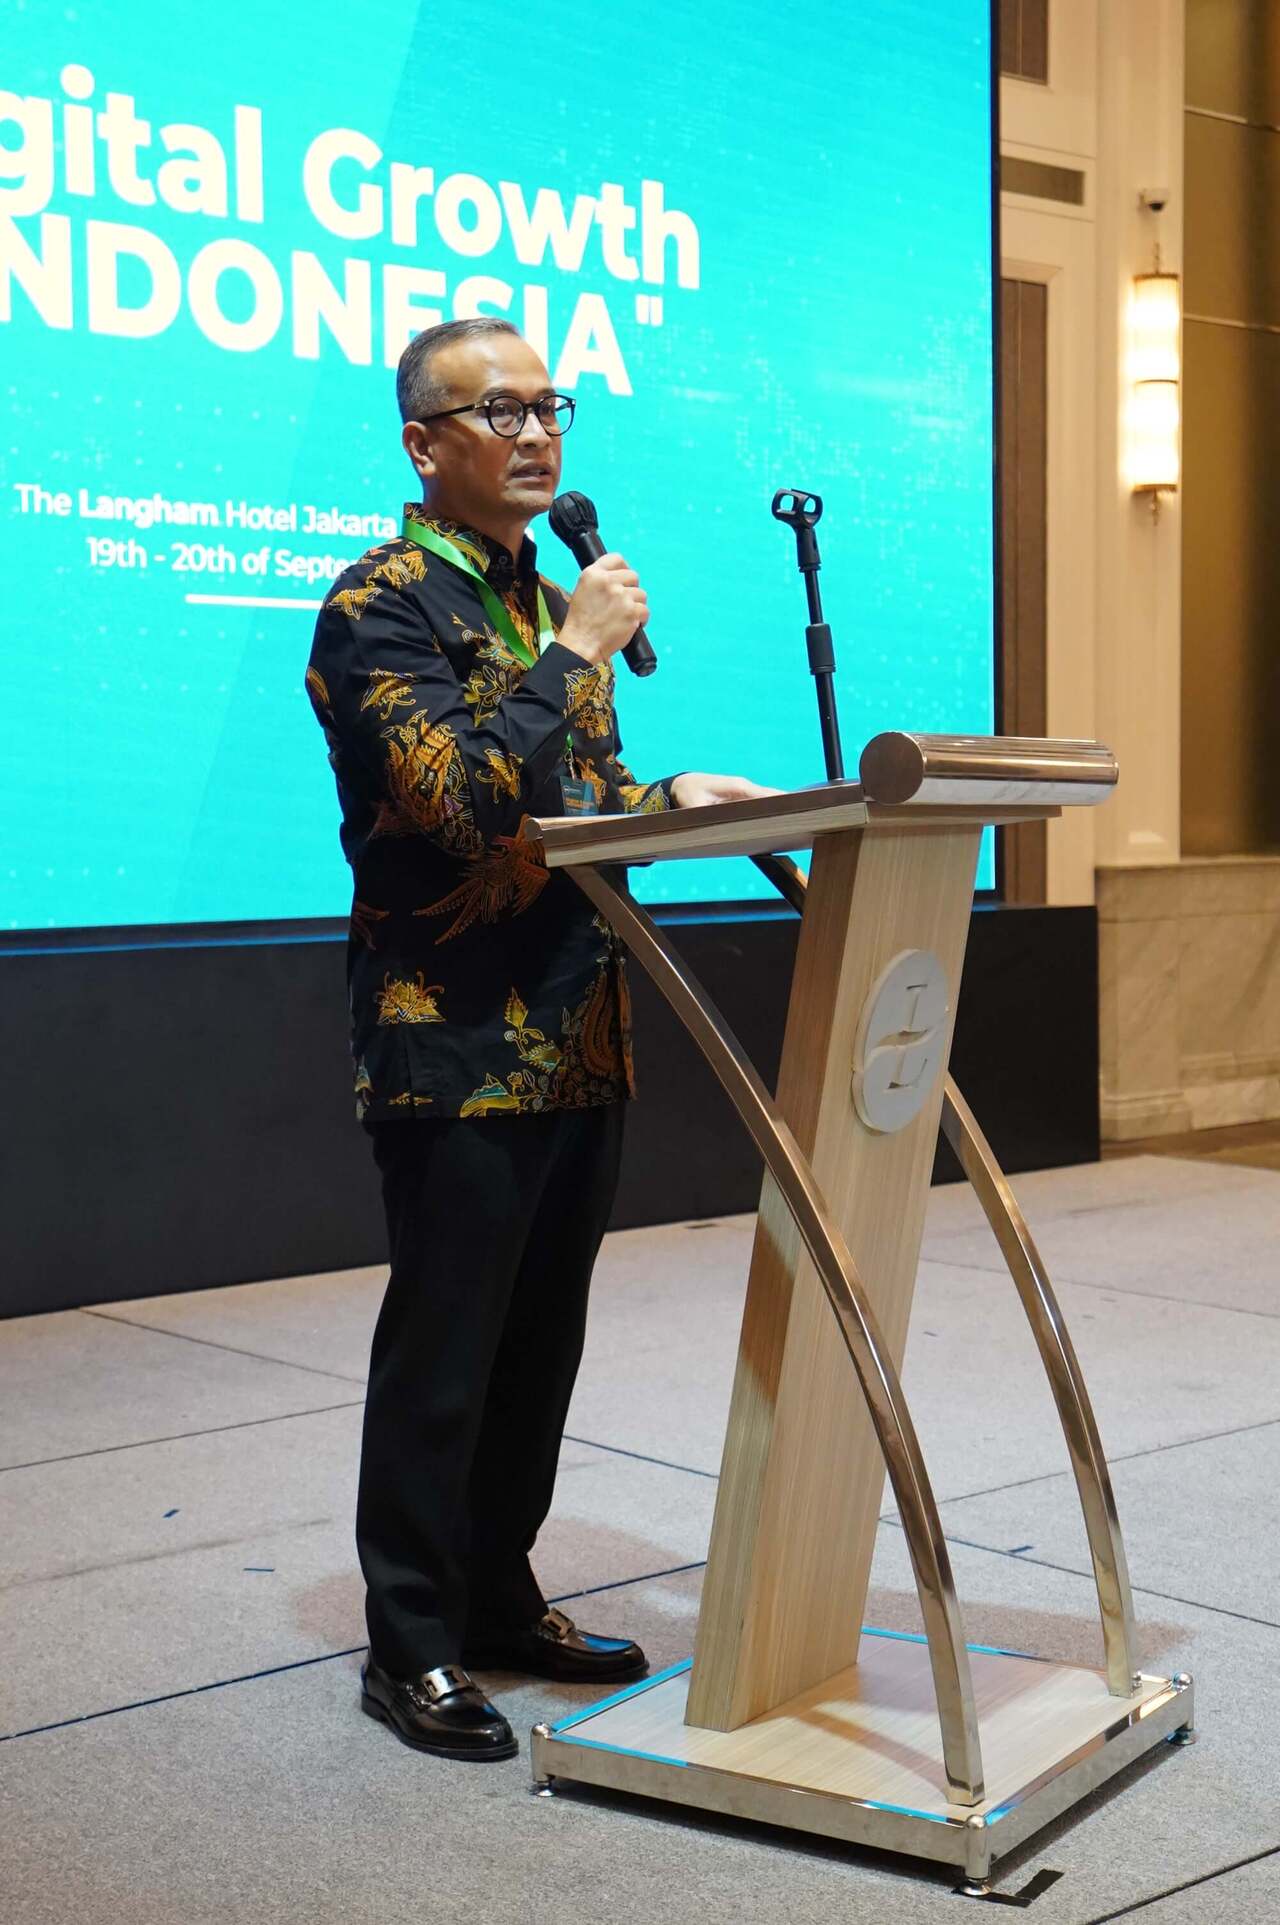 Triumphant Launch of the Indonesia Digital Council